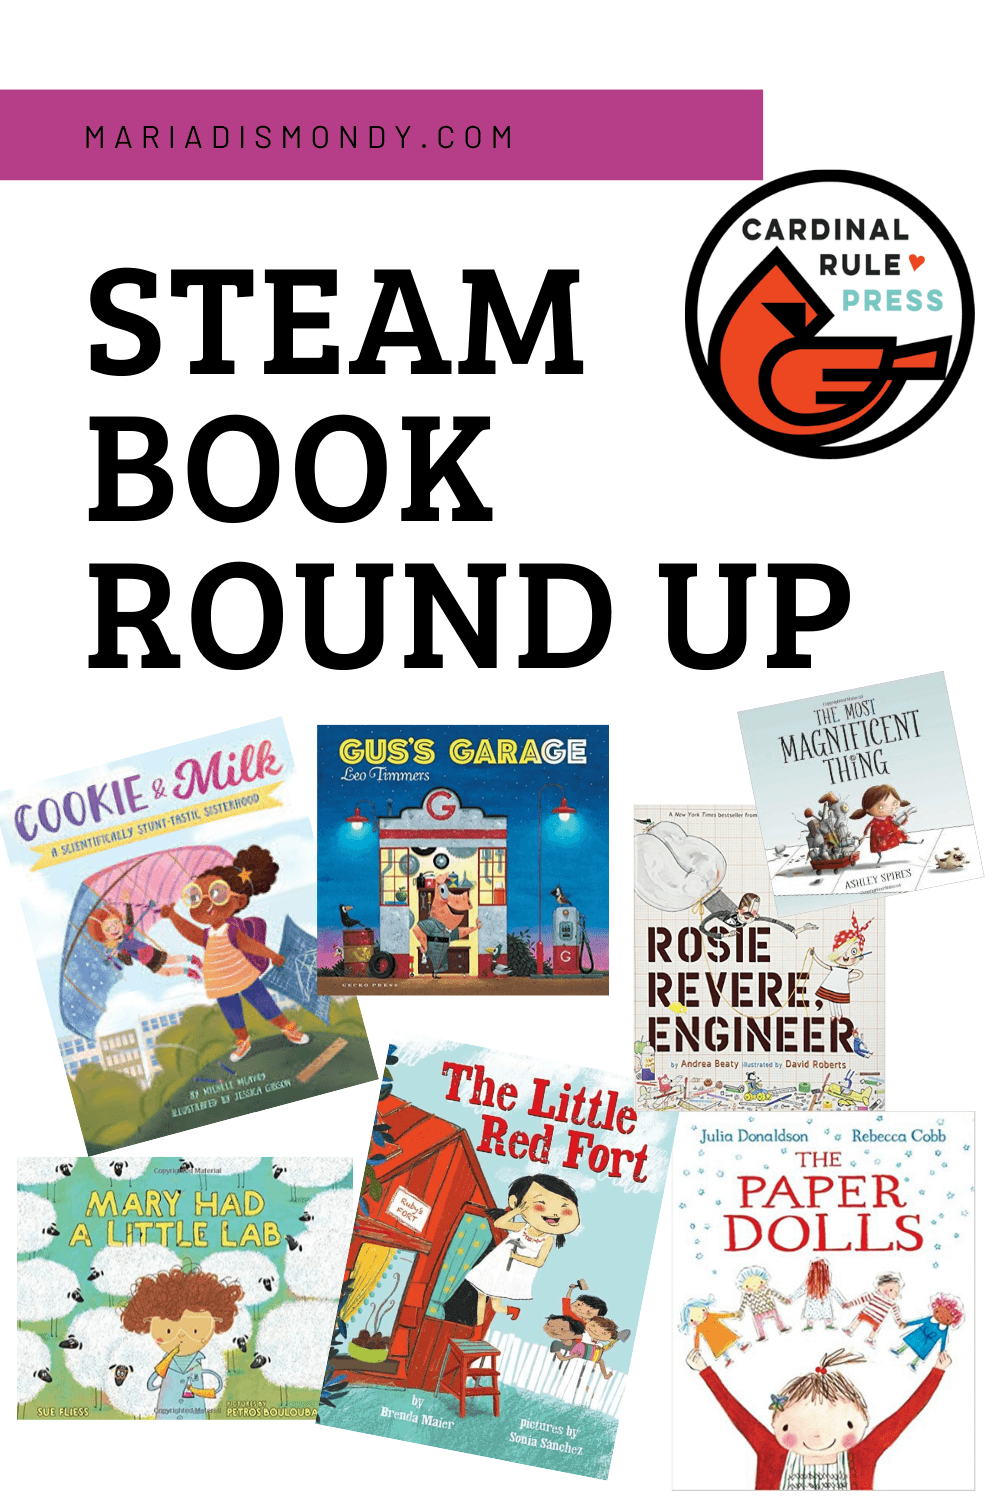 Books that Model STEAM for ALL-Here is a list of books curated for you that we recommend on support STEAM education for boys and girls! #SteamBooks #BooksToRead #ChildrensBooks #PictureBooks